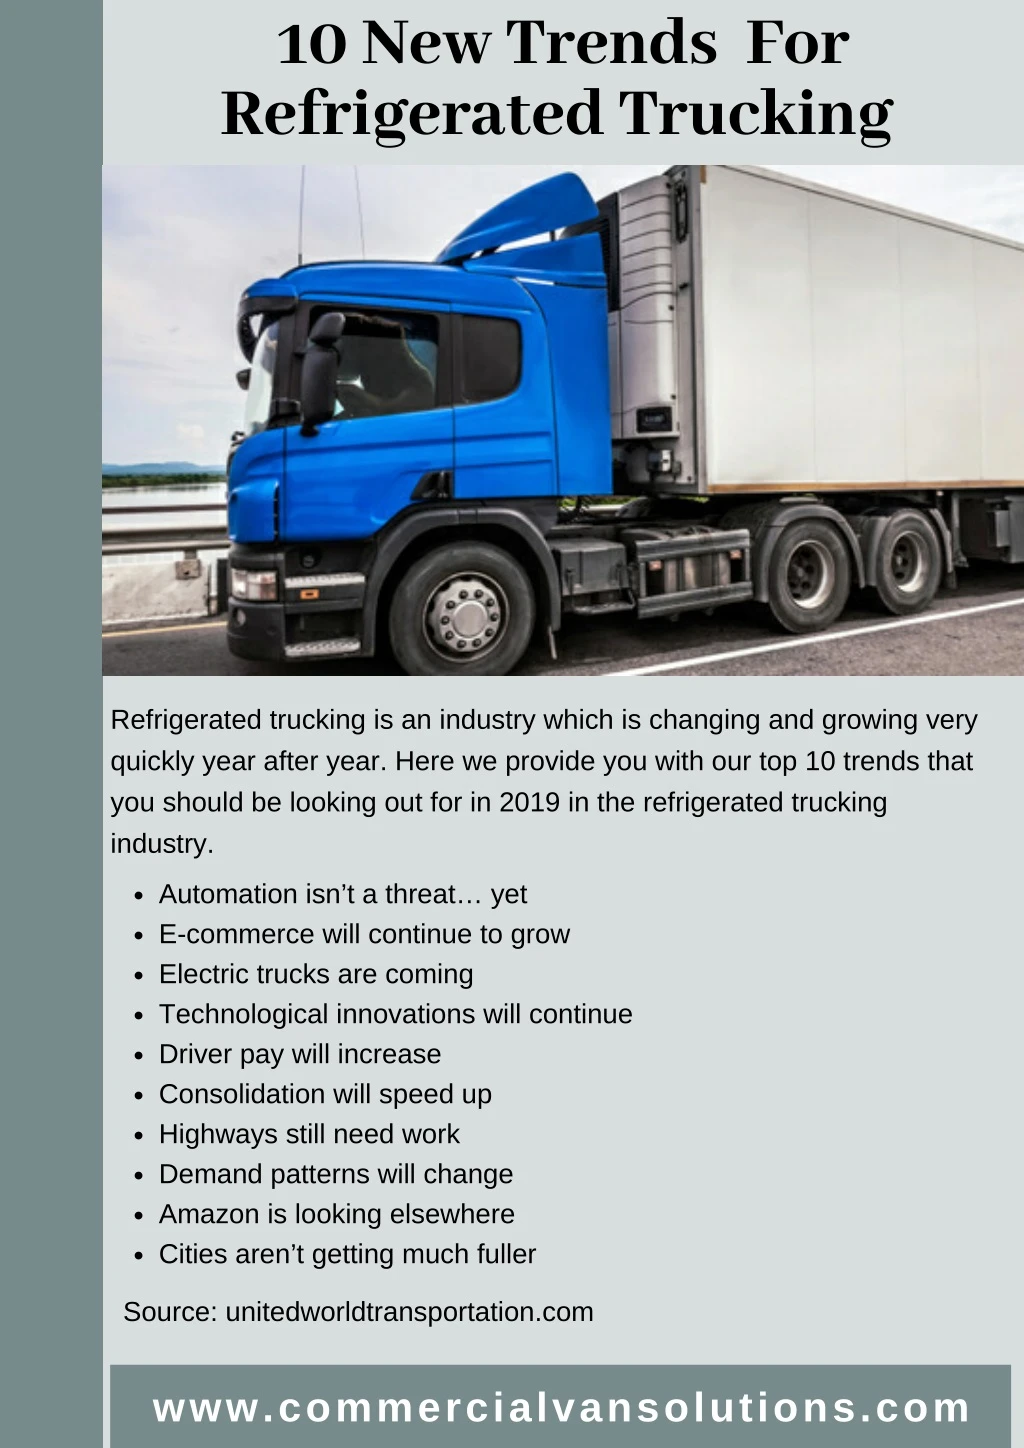 10 new trends for refrigerated trucking